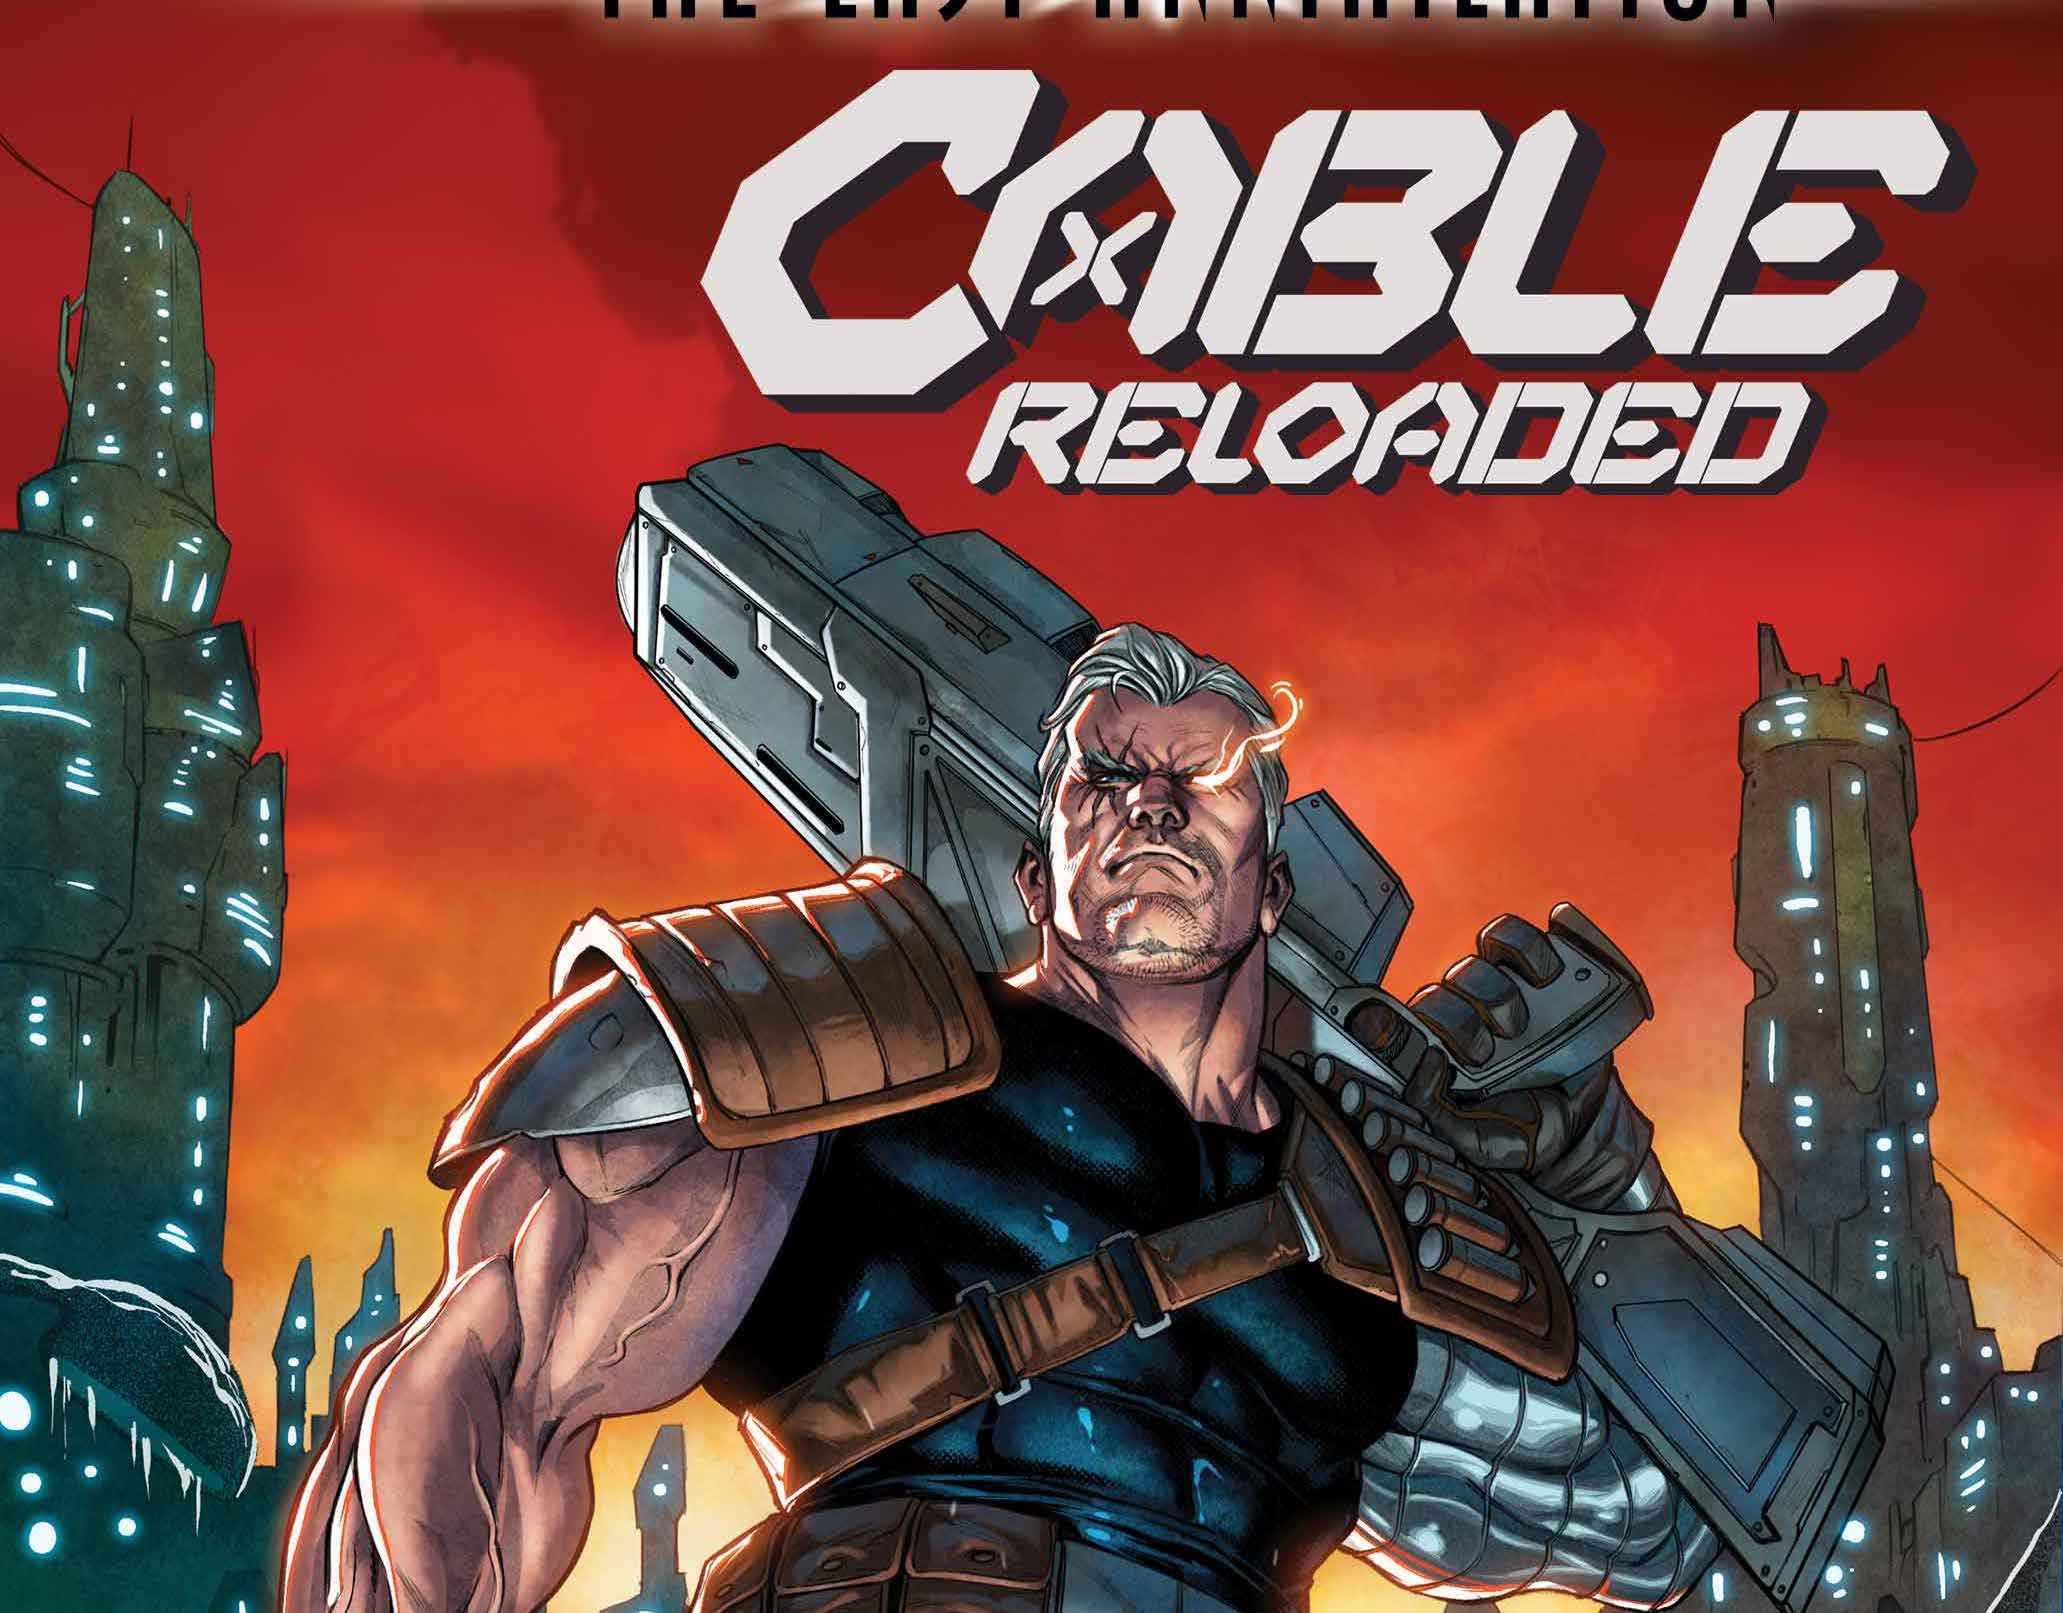 EXCLUSIVE Marvel First Look: Cable: Reloaded #1